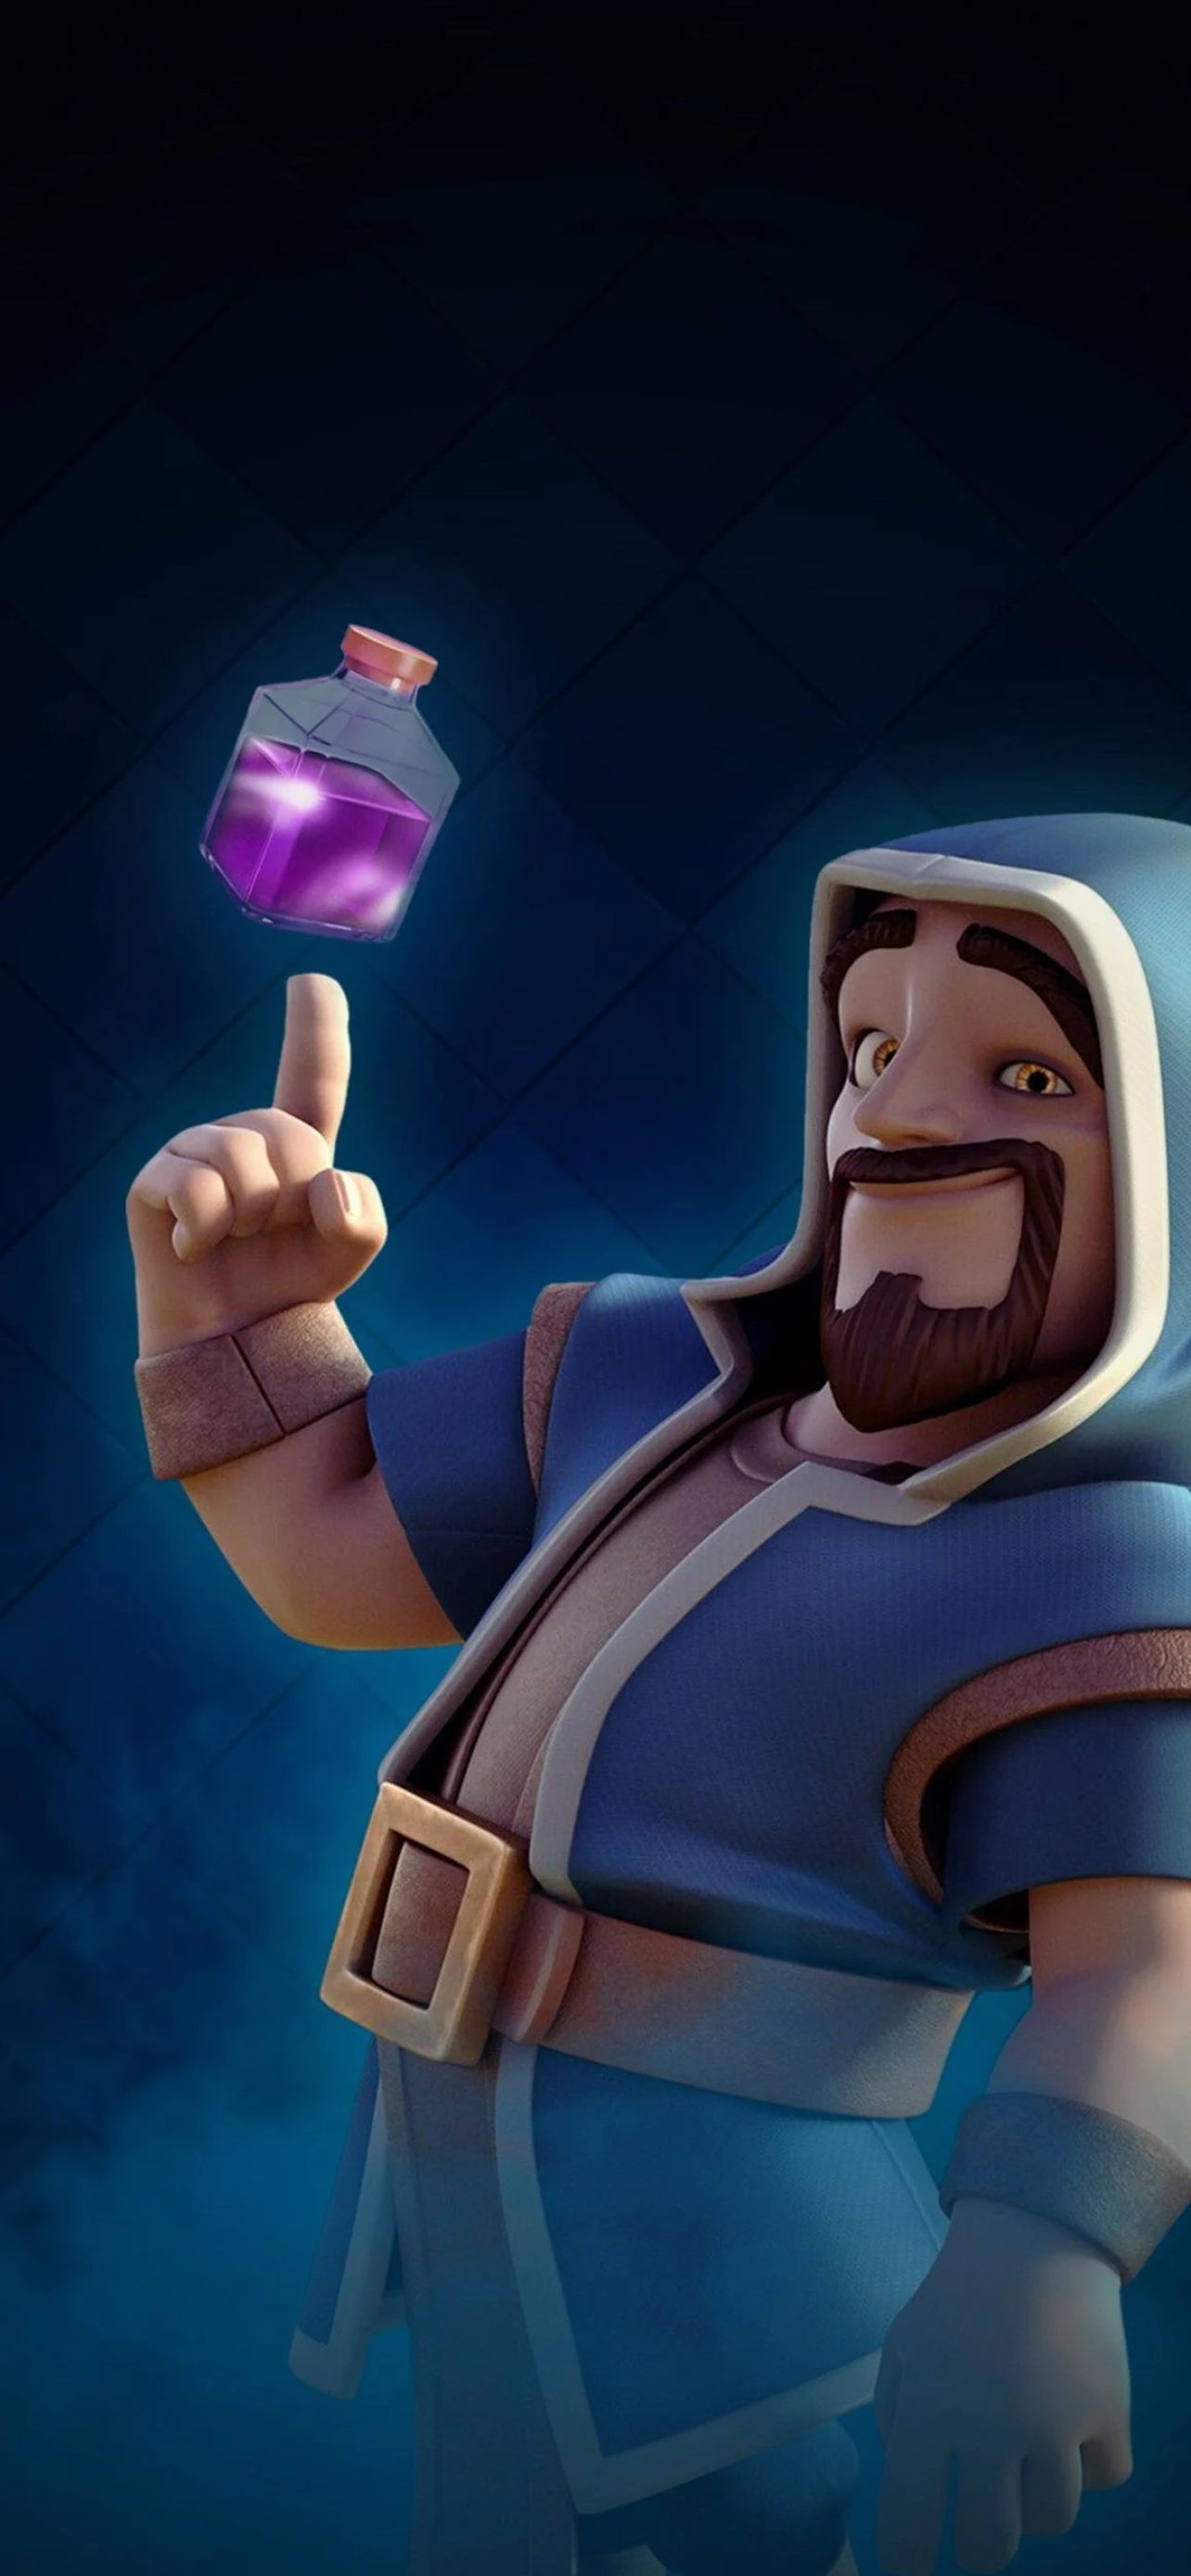 Clash of Clans: CoC, The mobile strategy game that lets you fight other players' armies. 1290x2780 HD Background.